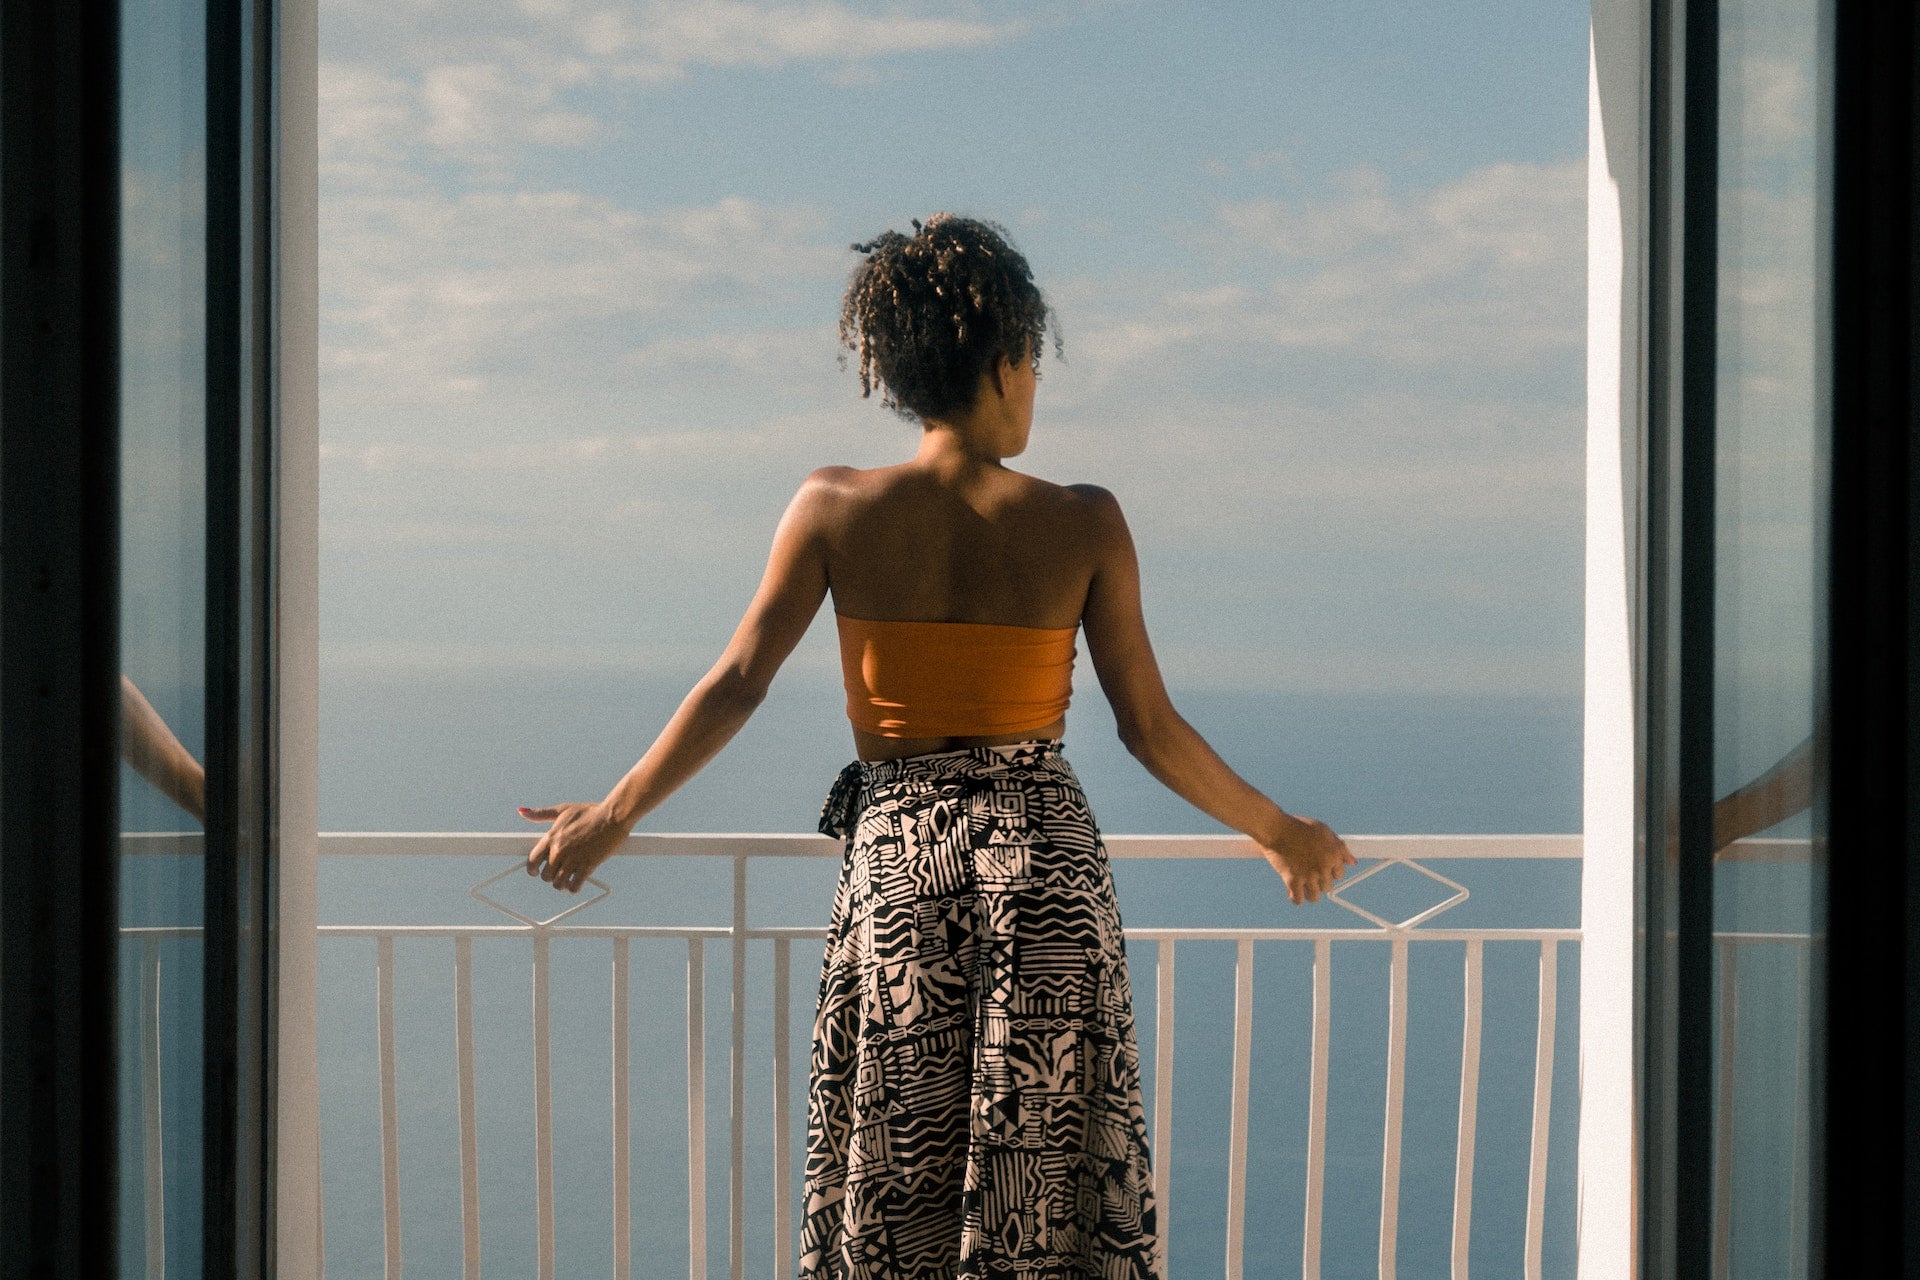 A woman standing on a balcony looking out over the ocean.